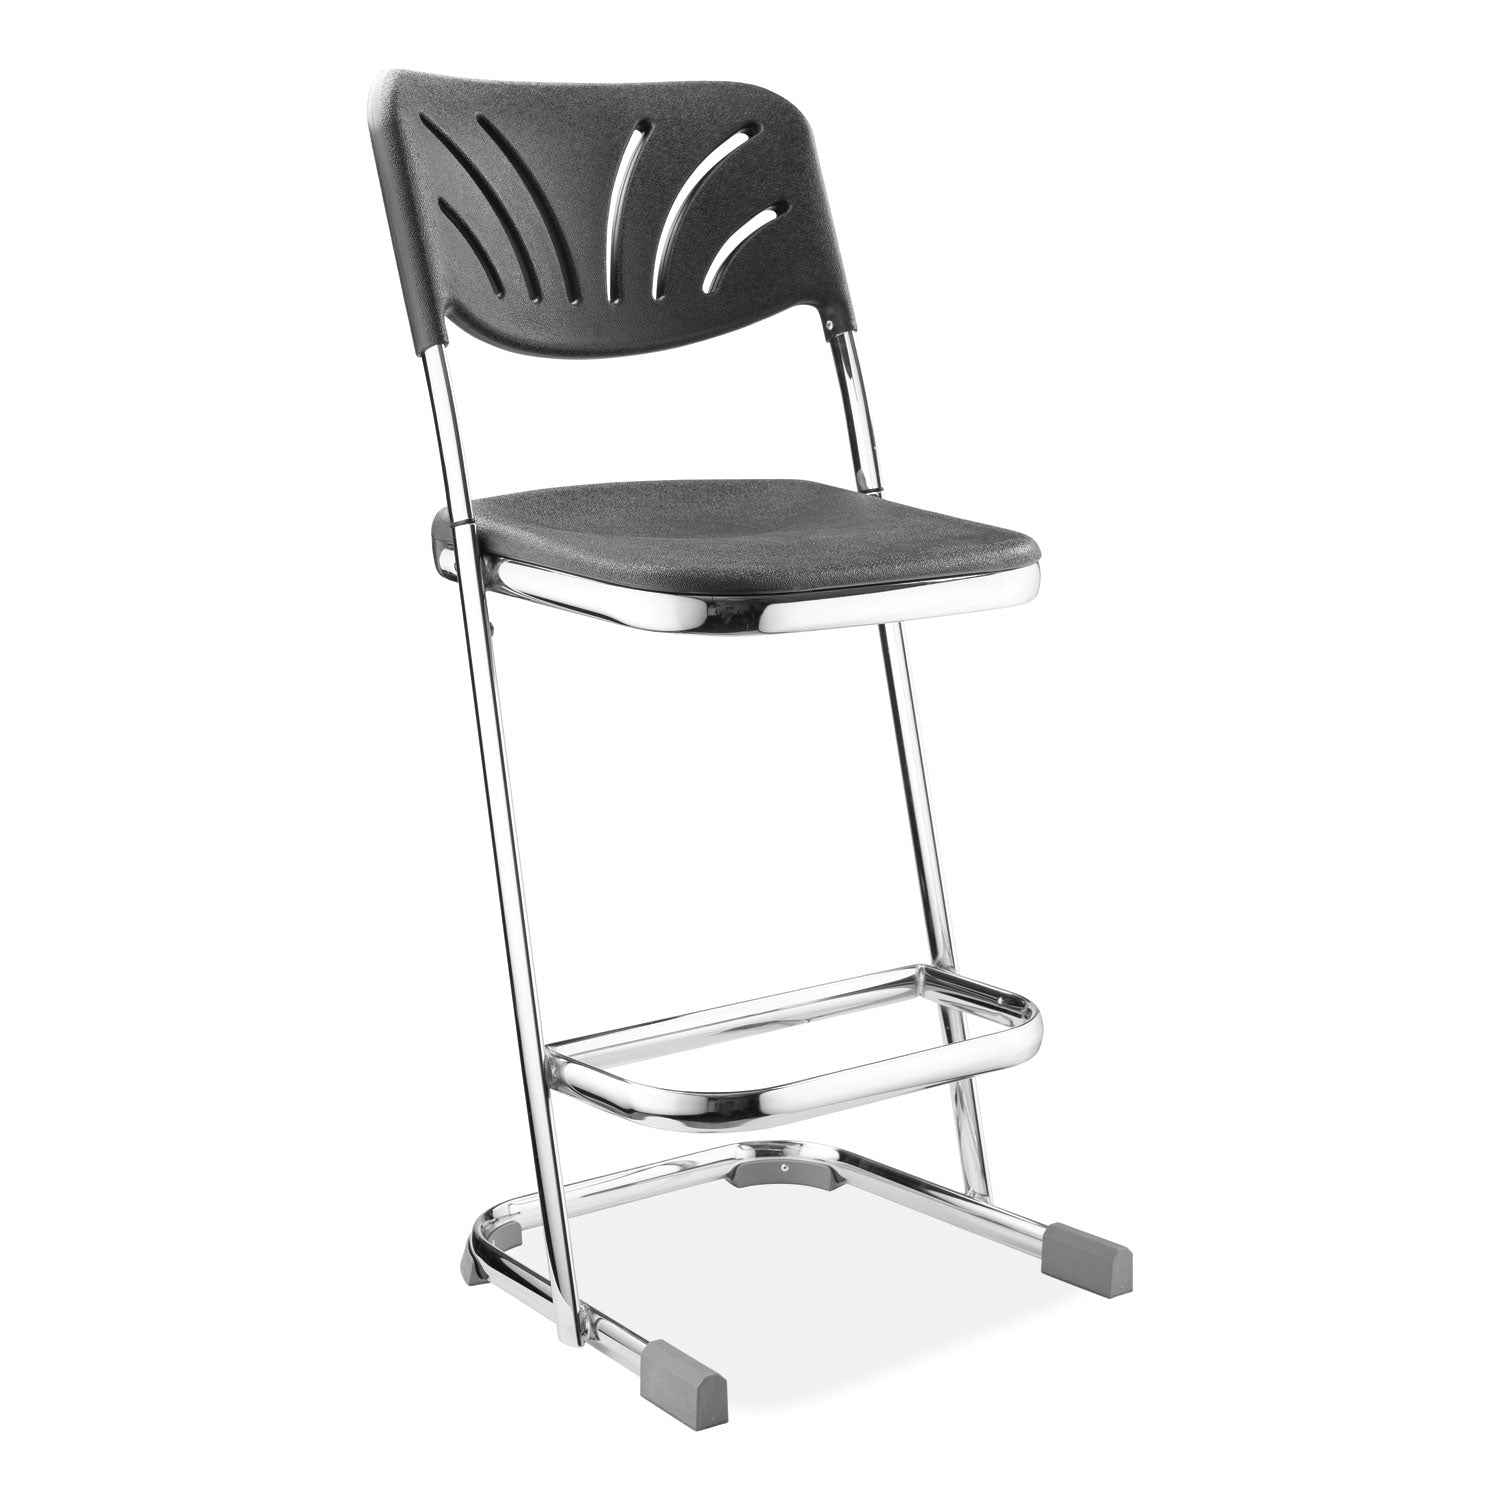 6600-series-elephant-z-stool-with-backrest-supports-500-lb-24-seat-ht-black-seat-back-chrome-frameships-in-1-3-bus-days_nps6624b - 4